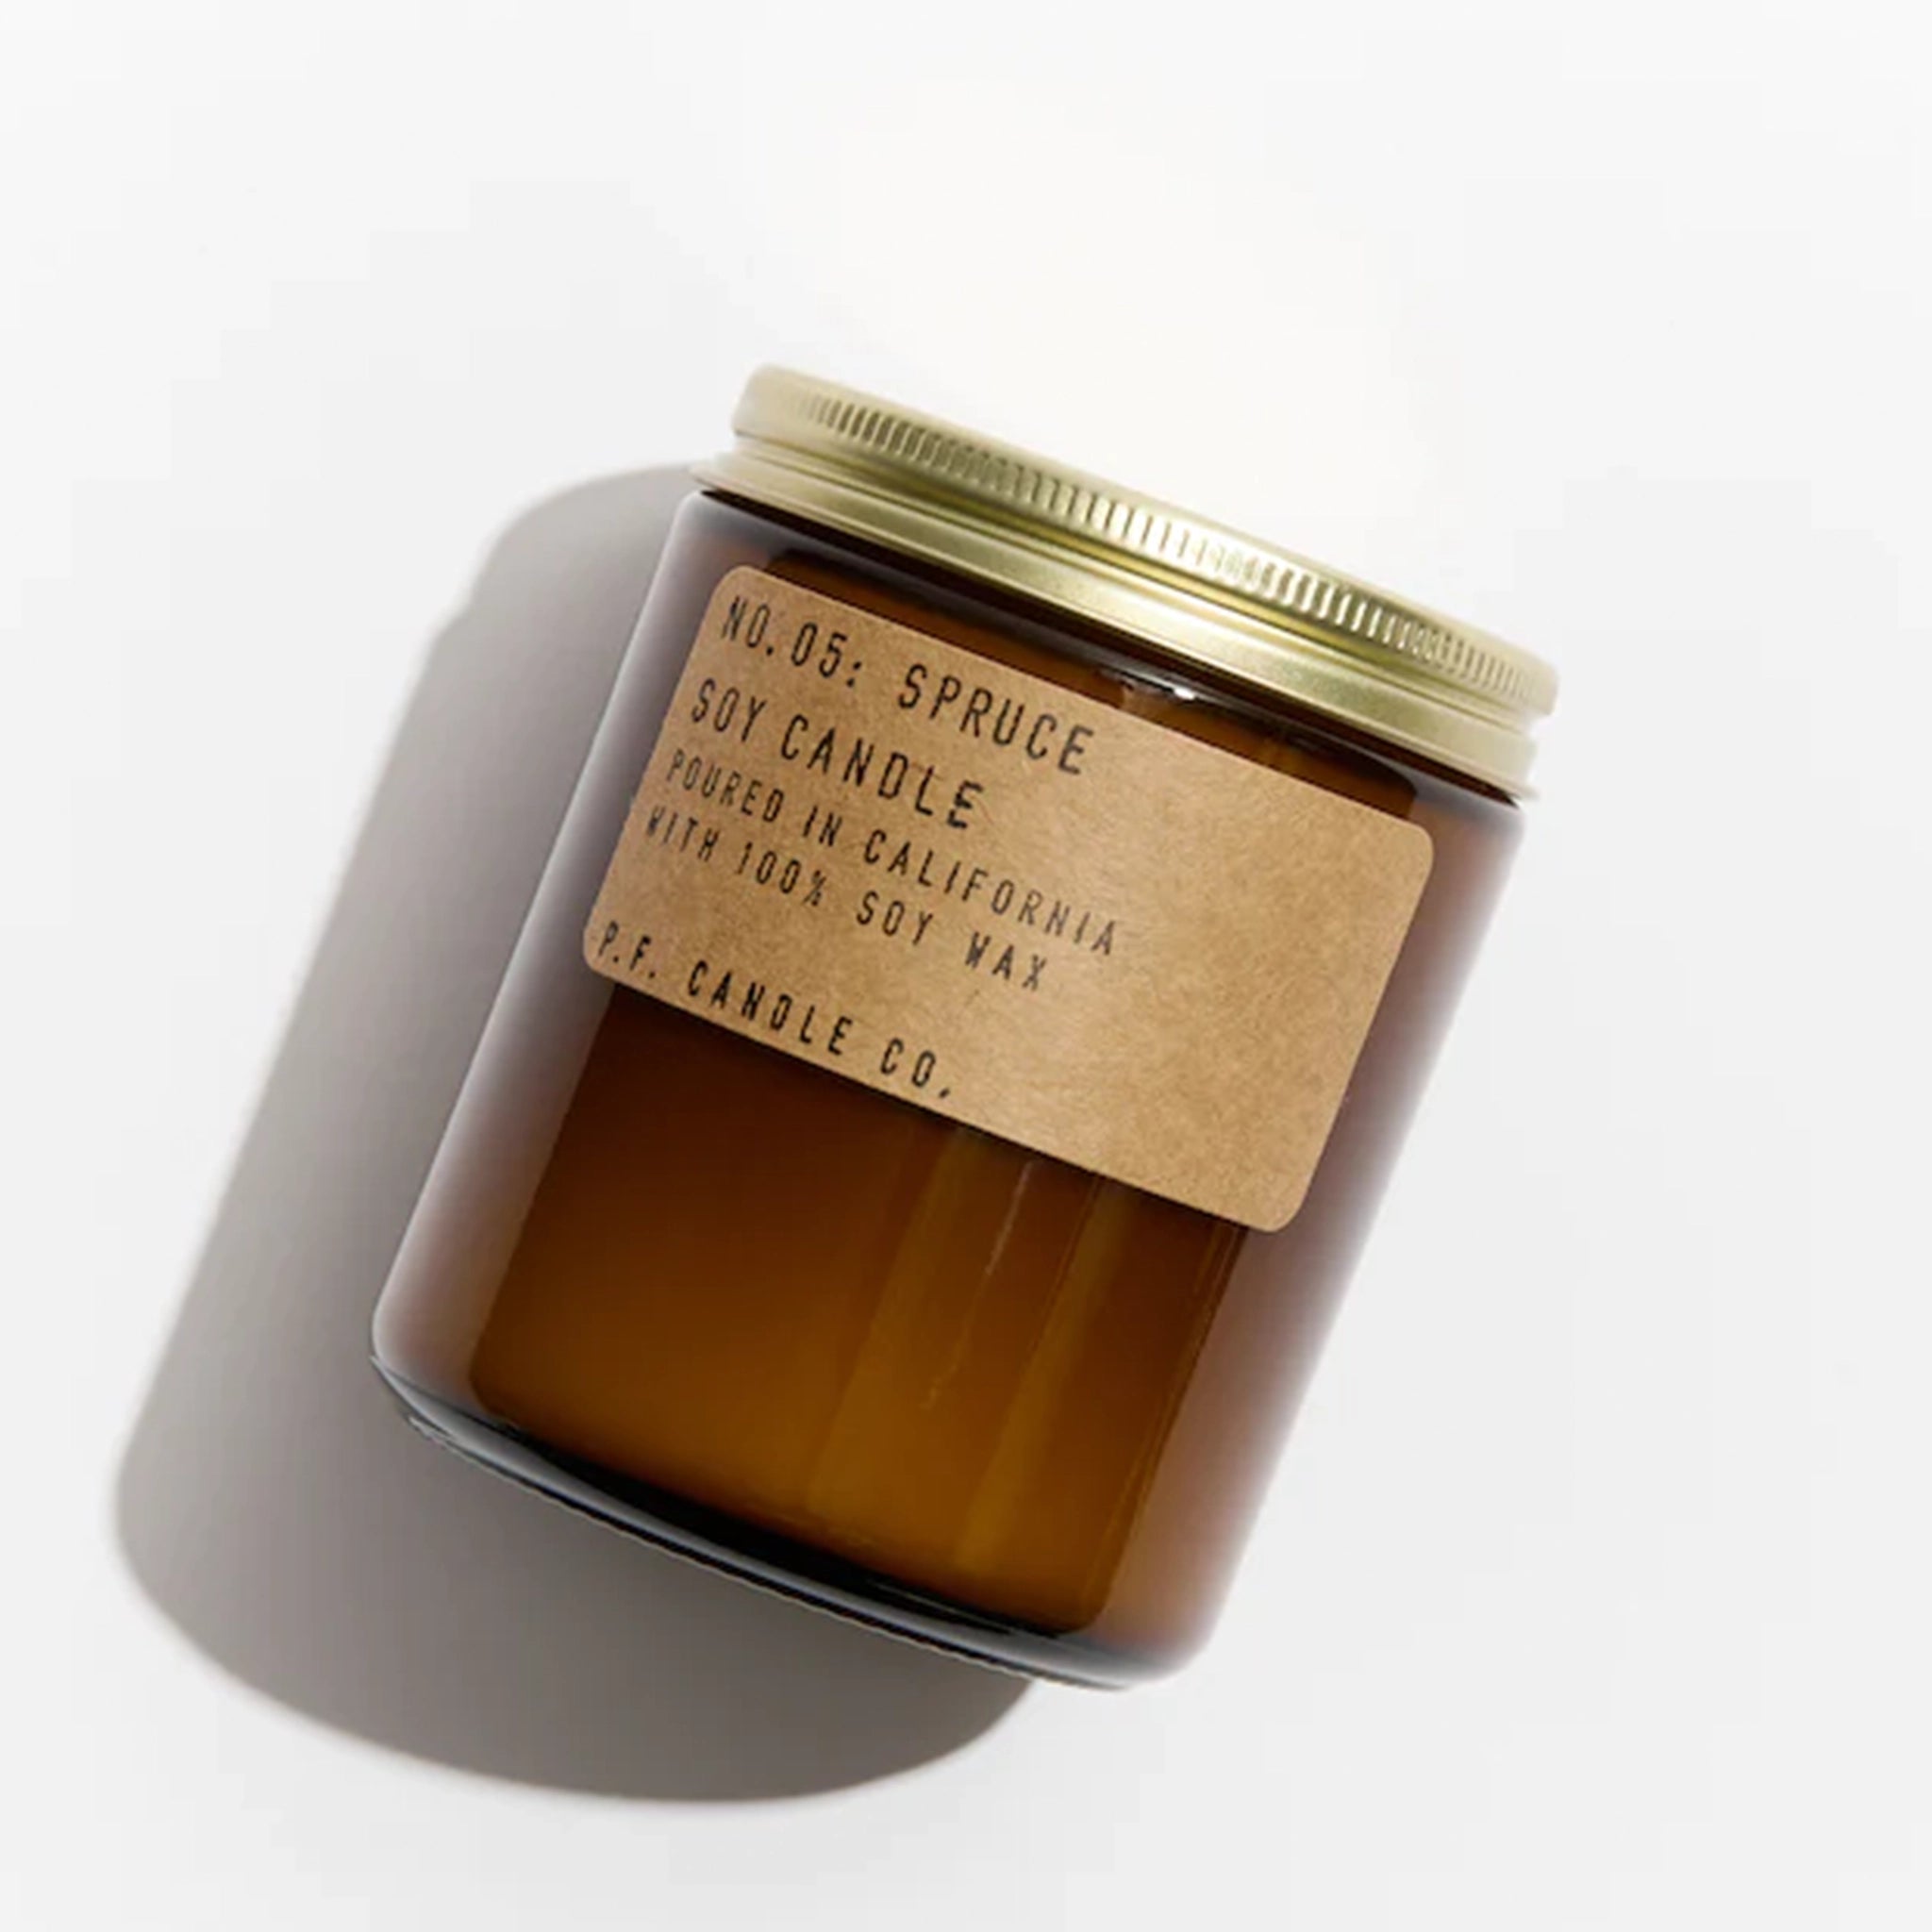 On a white background is an amber glass jar with a brown label that reads, "Soy Candle No. 05: Spruce". 